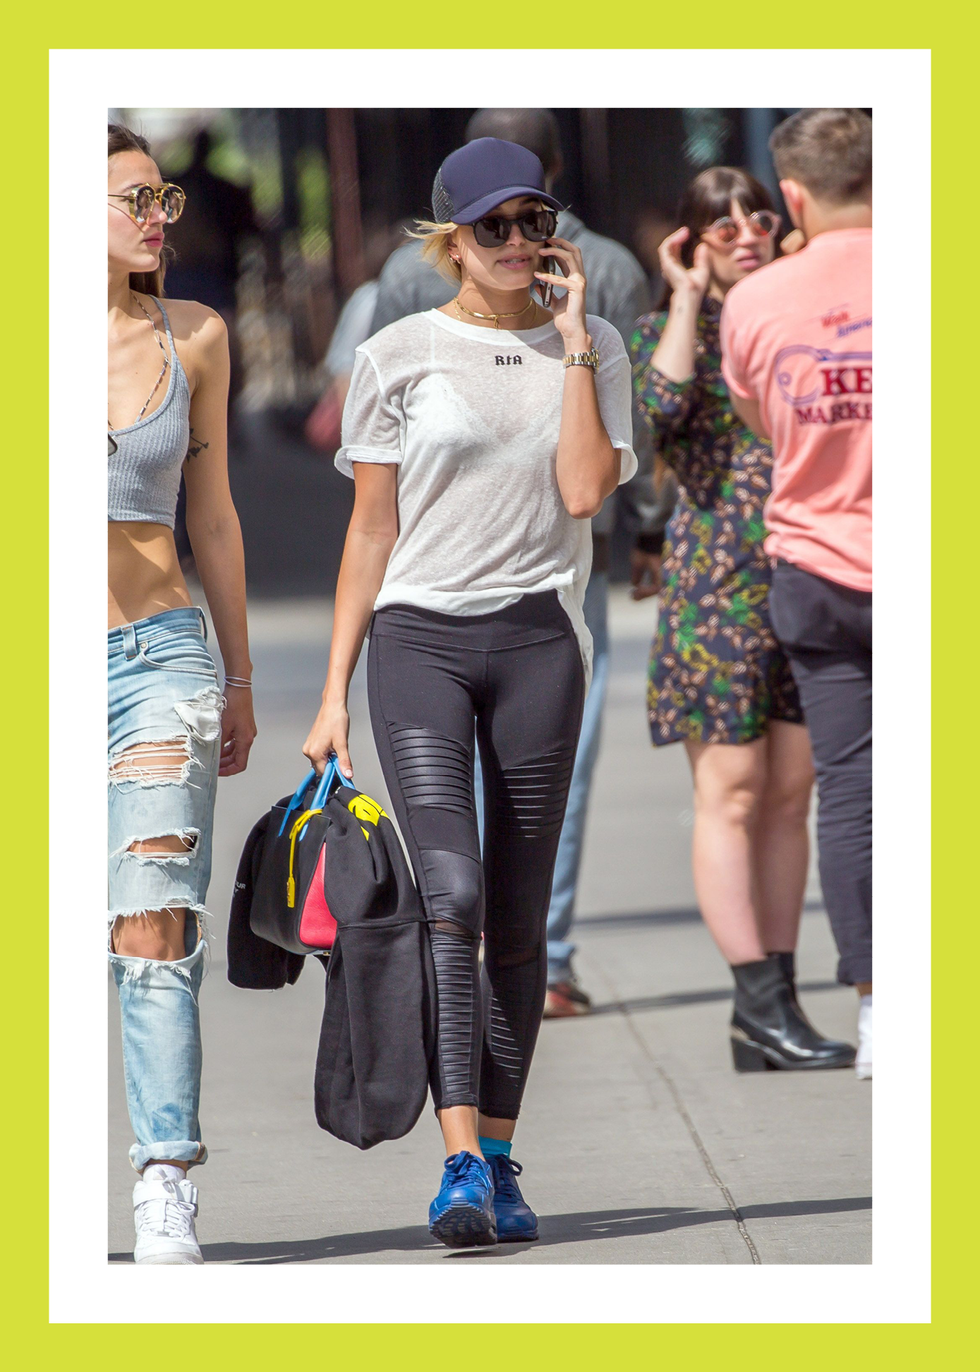 Best workout clothing and equipment, per celebrities